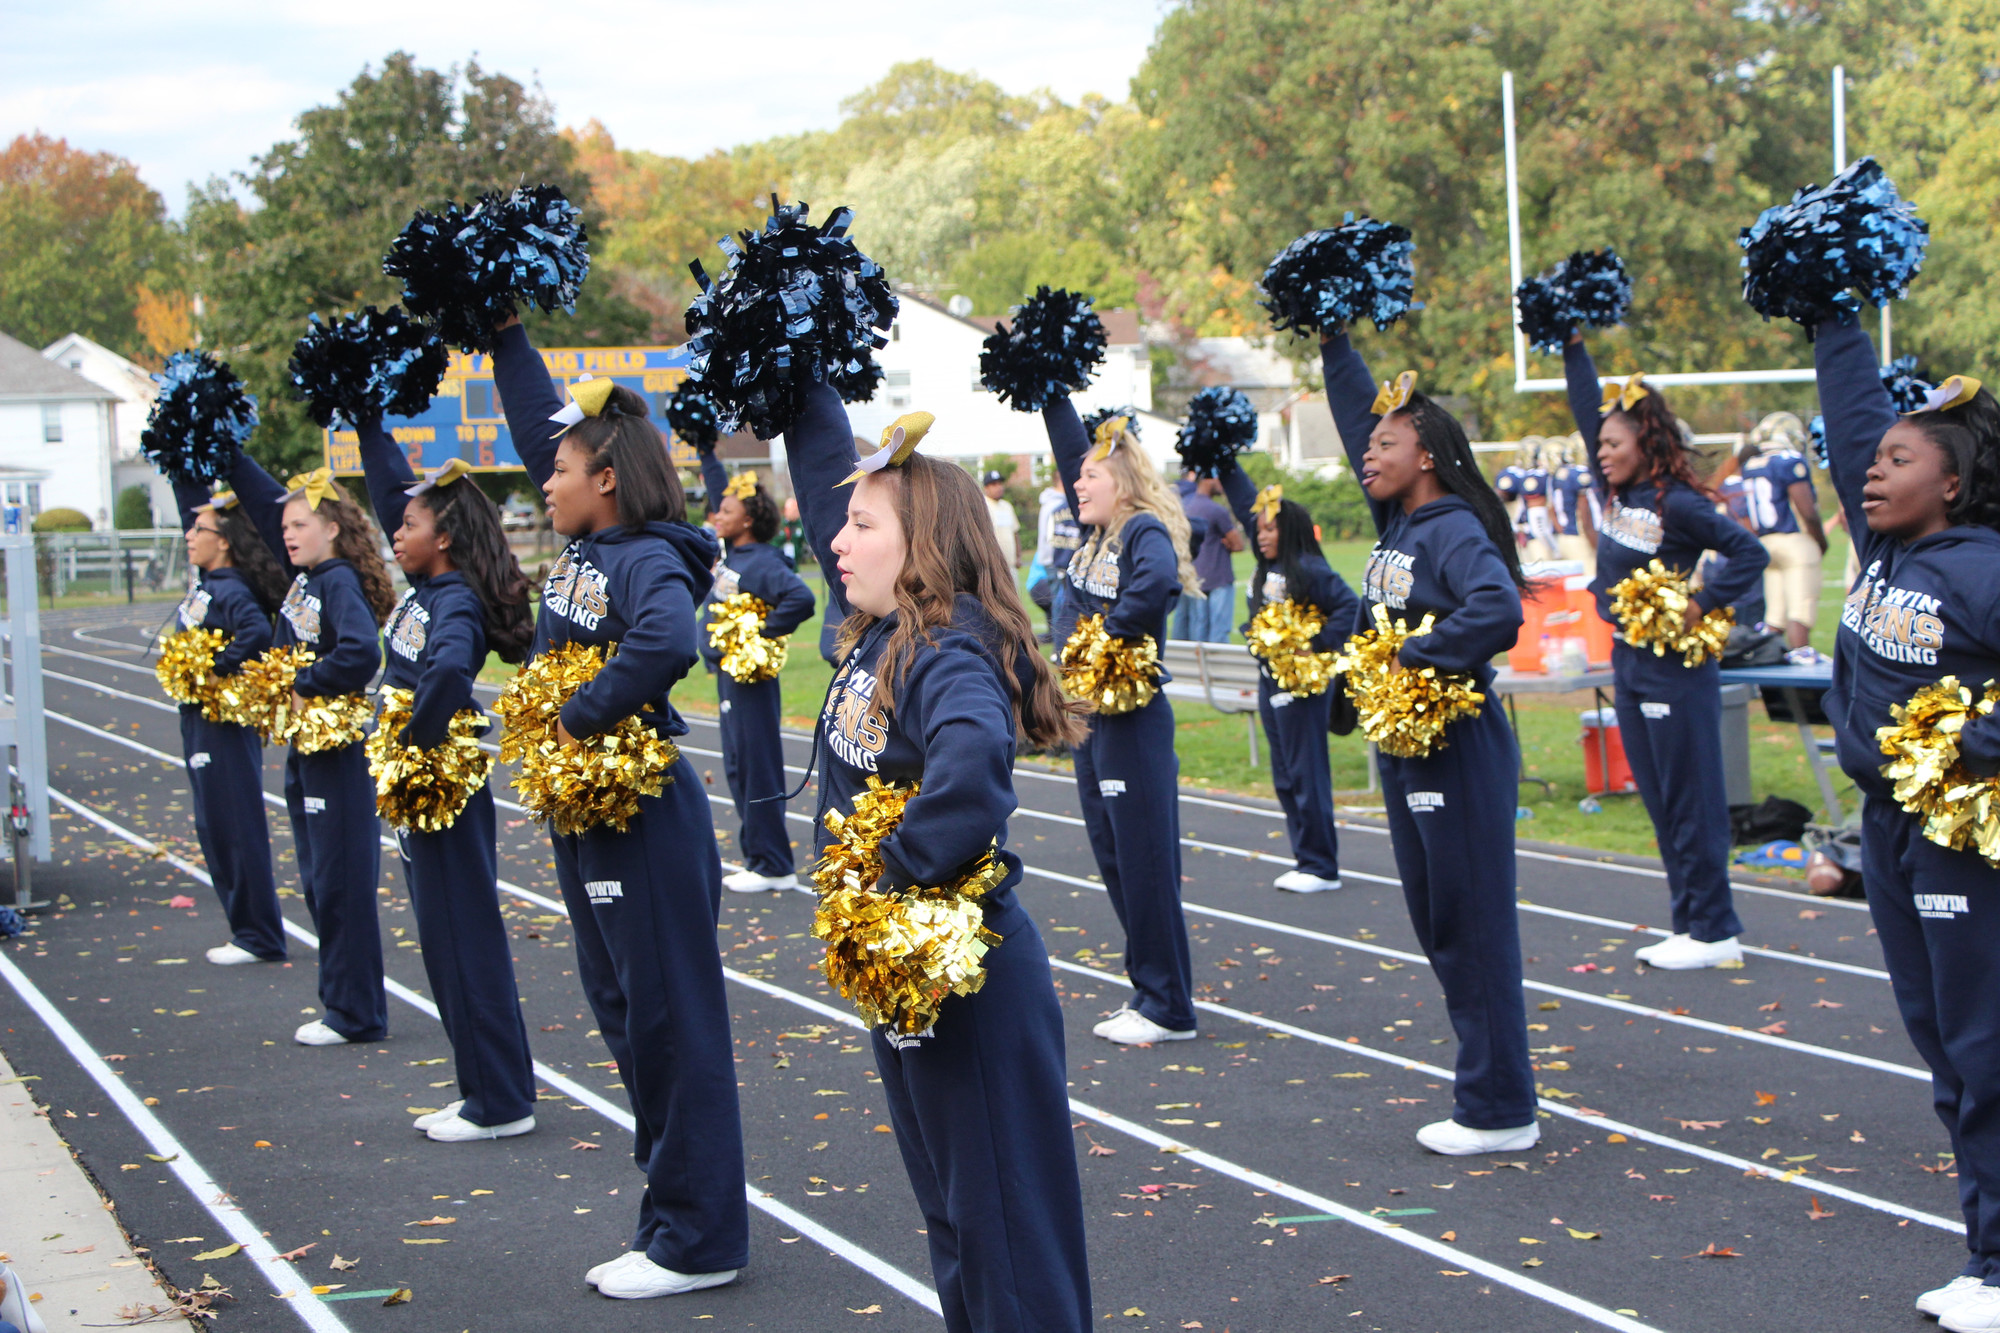 The Varsity Cheerleading Squad got the crowd riled up.